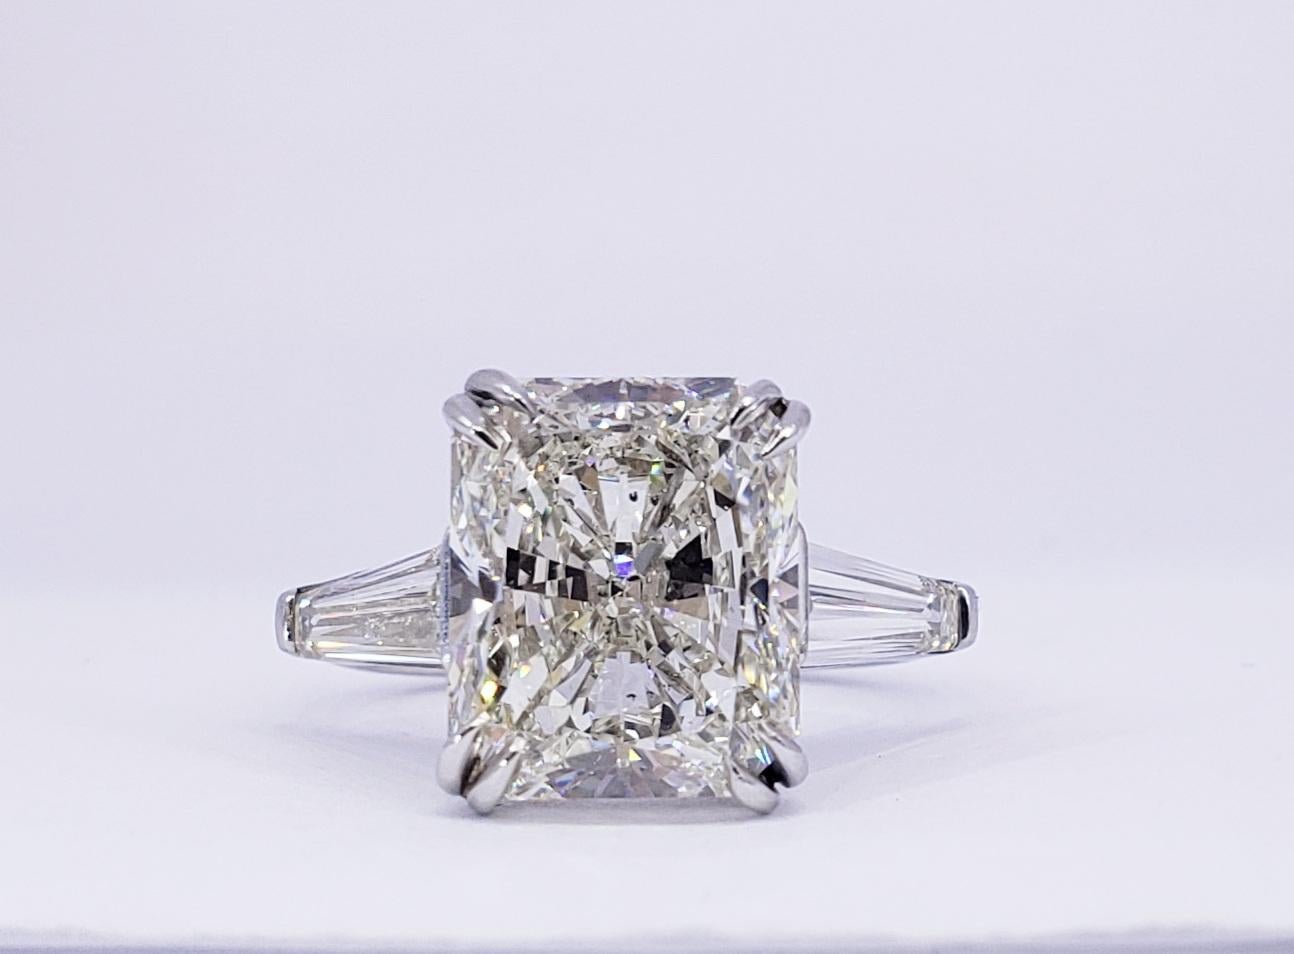 Rosenberg Diamonds 6.05 carat Radiant cut J color SI2 clarity is accompanied by a GIA certificate. This exceptional SI2 Radiant is full of brilliance and it is set in a handmade platinum setting with perfectly matched pair of tapered baguette side